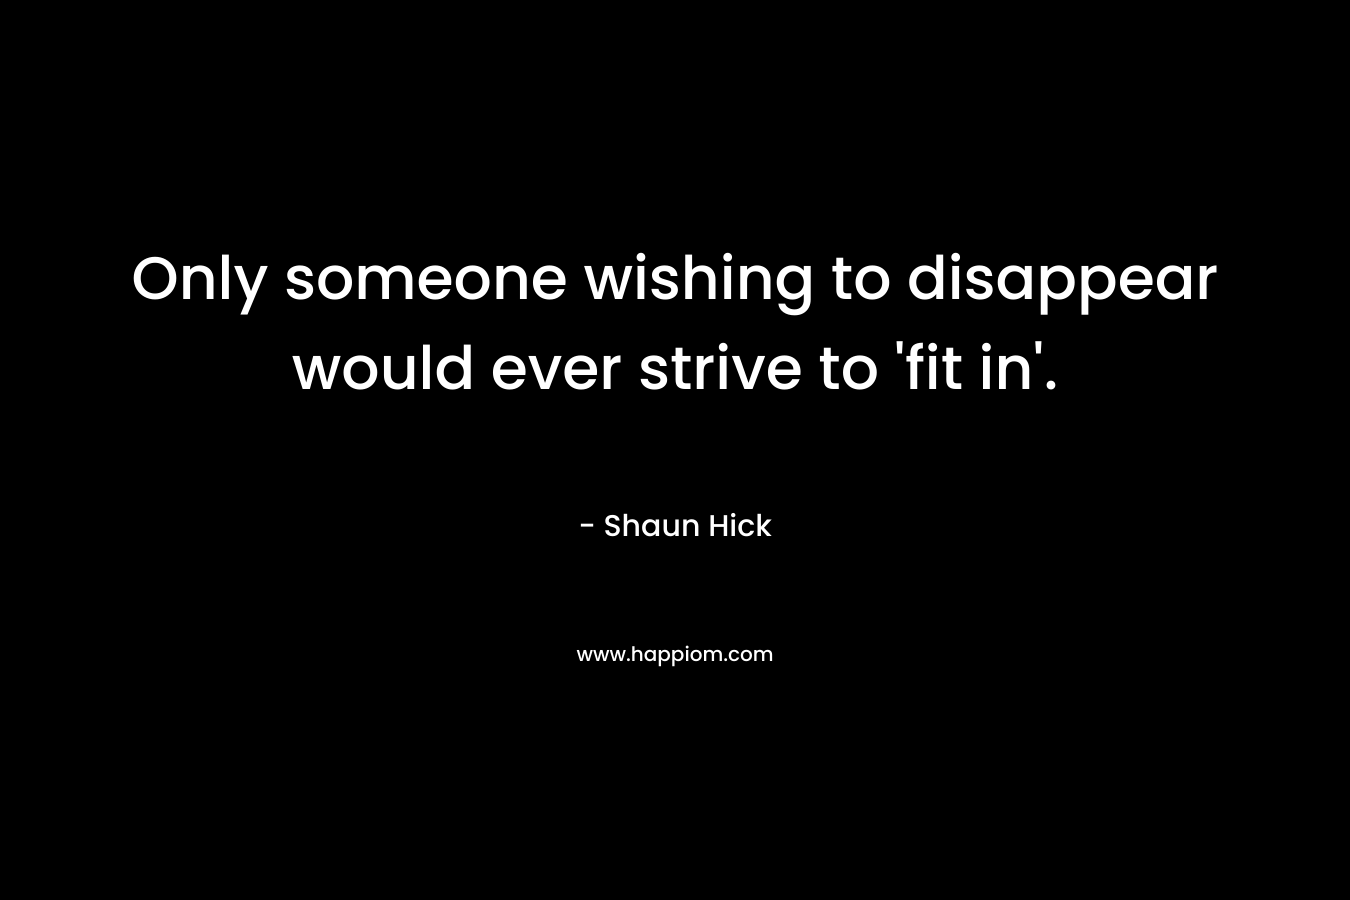 Only someone wishing to disappear would ever strive to 'fit in'.